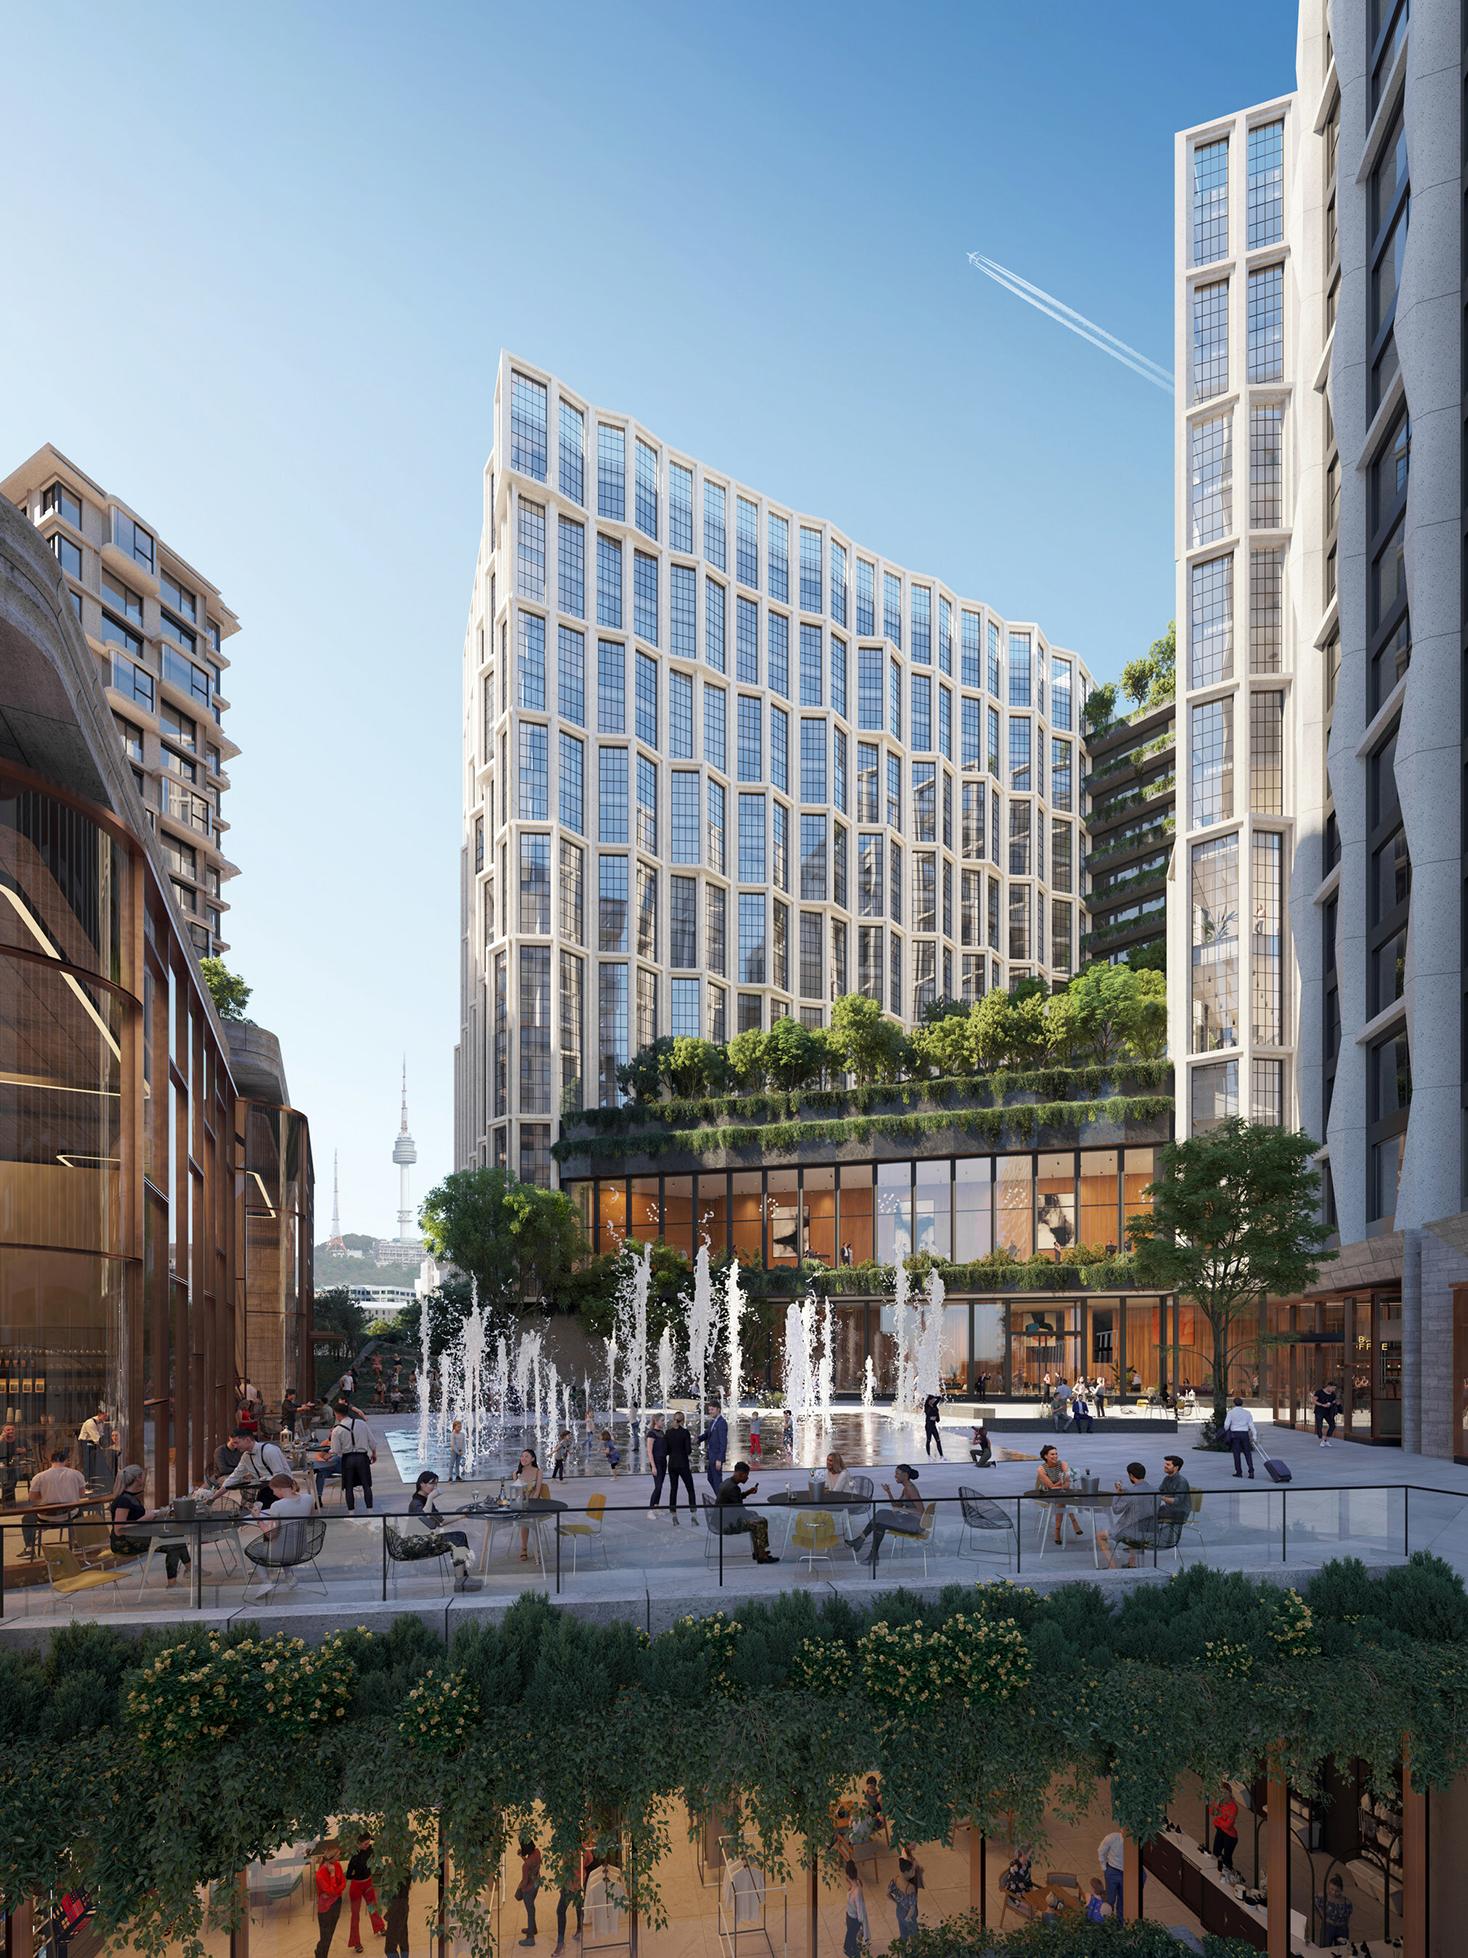 The hotel will open in Seoul – the capital city of South Korea – and mark Rosewood's first foray into the Korean market / Rosewood Hotels & Resorts